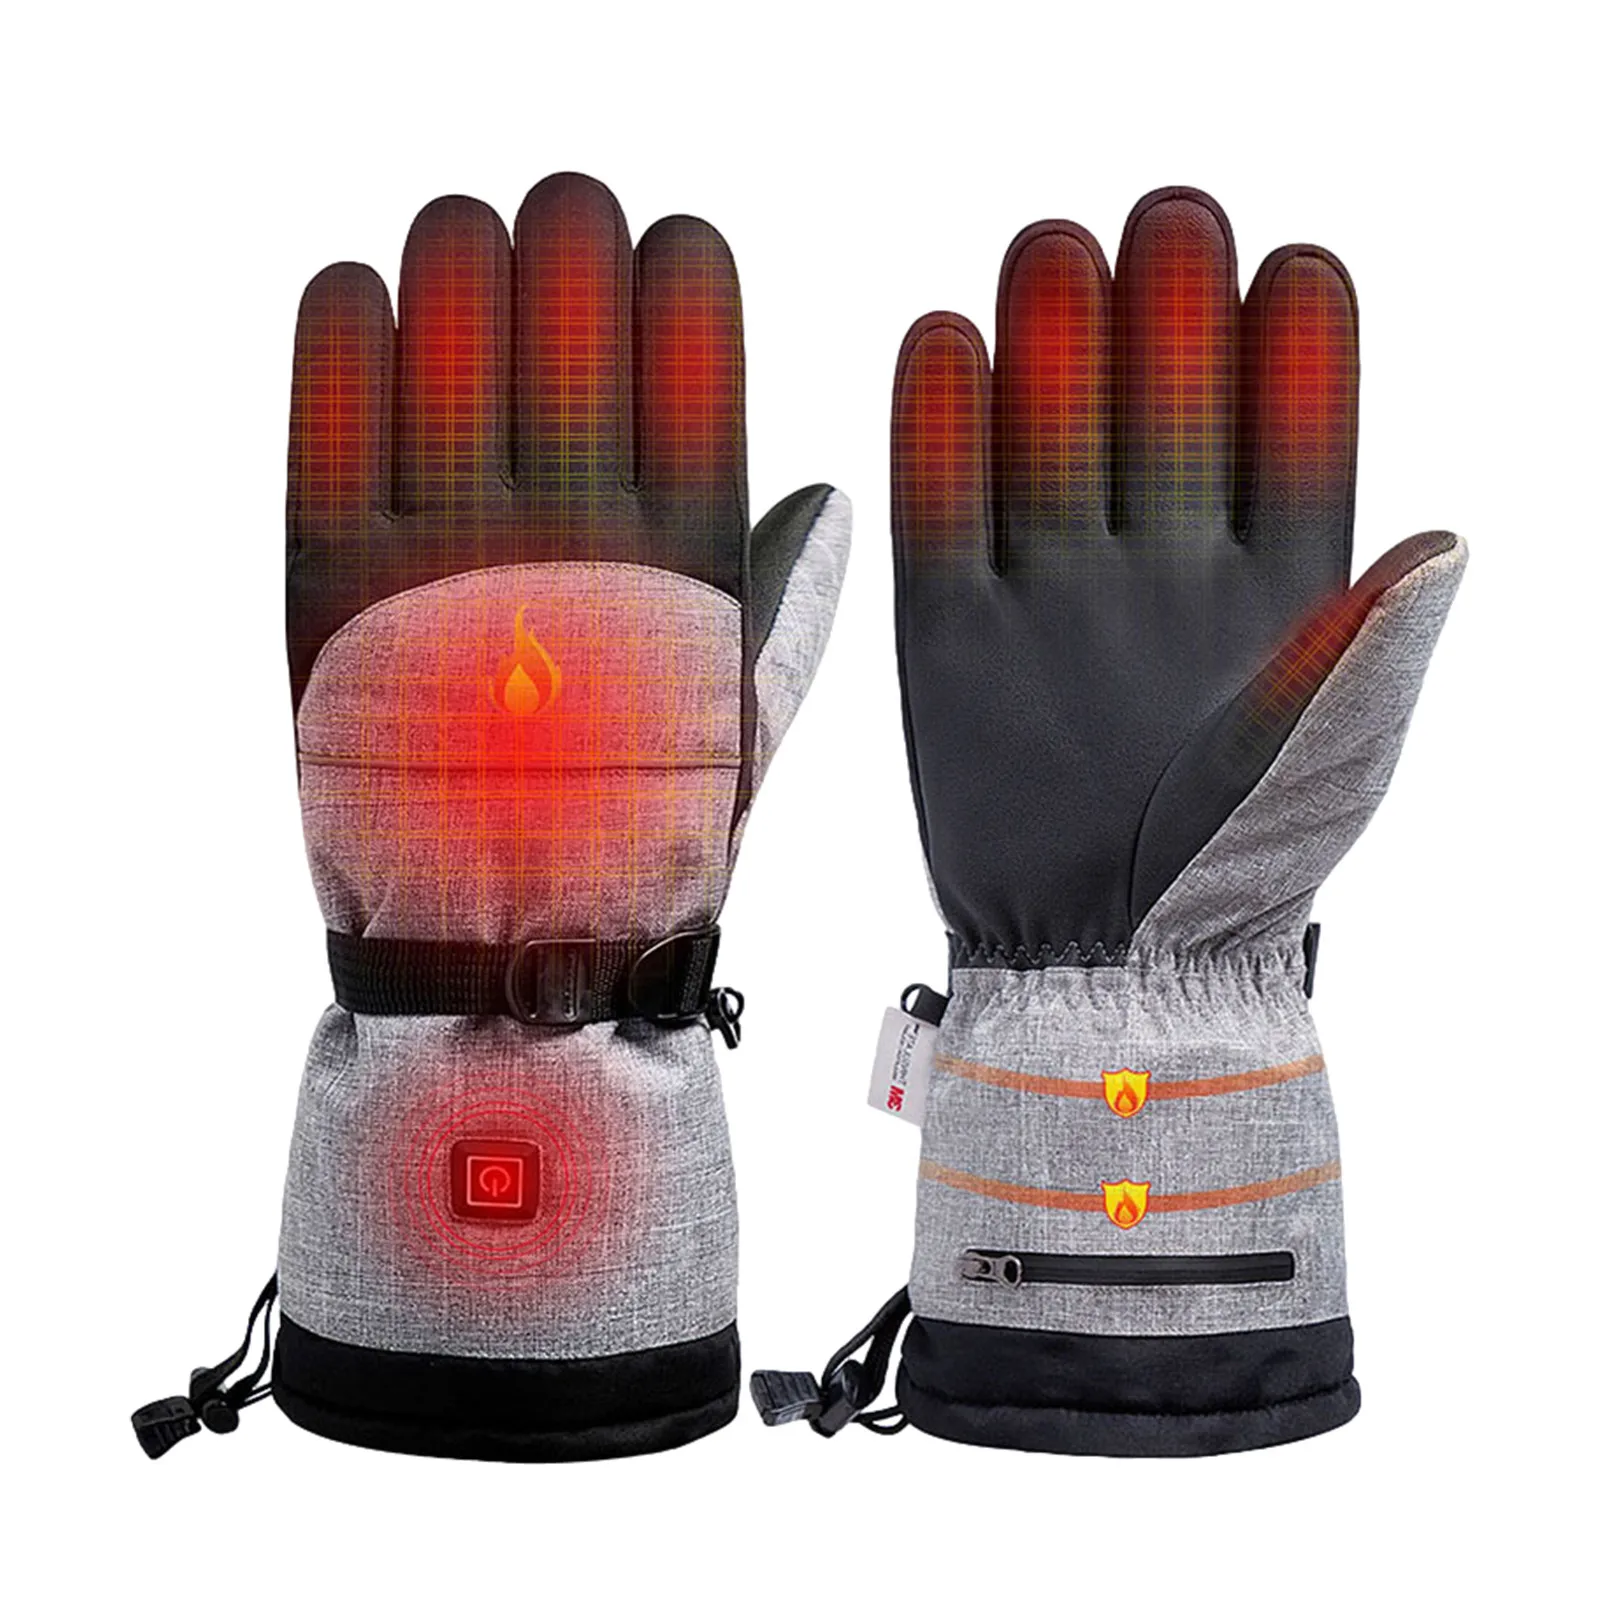 

3pcs/set Outdoor Winter Ski Warm Heated Gloves Hand Warmer Mittens Cycling Riding 1pair Electric Heating Gloves2pc Typical